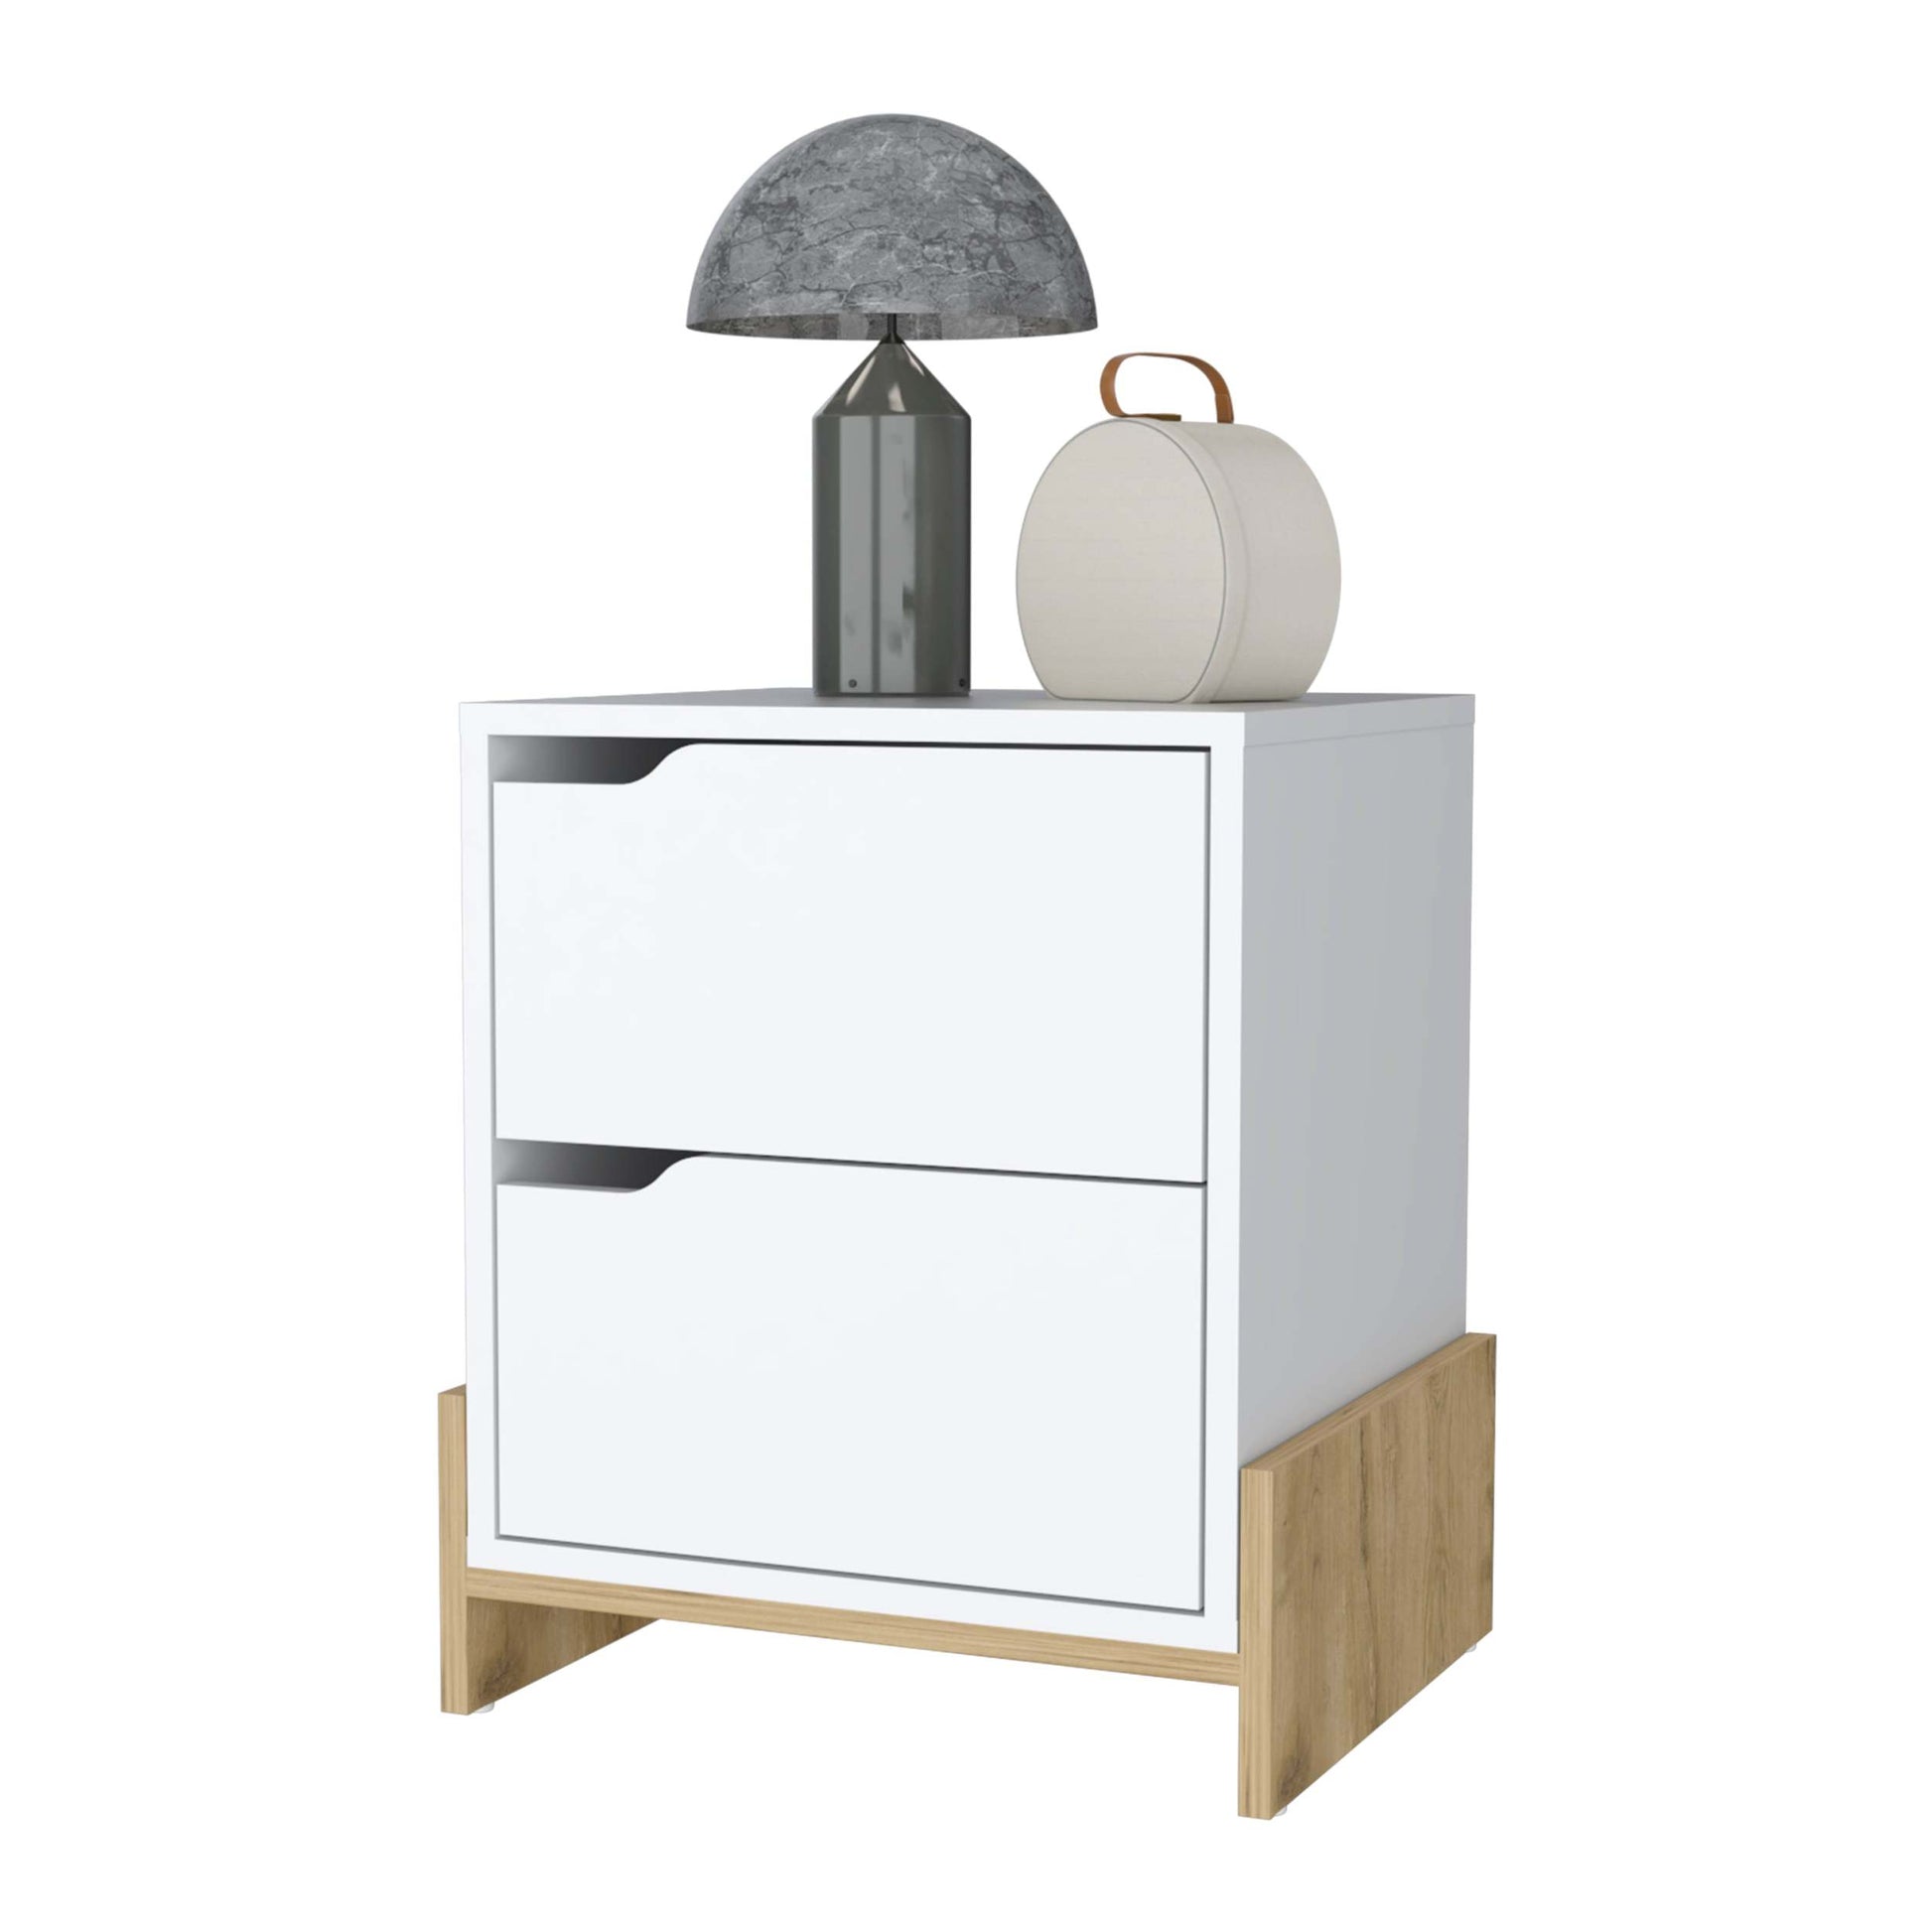 Lovell Nightstand With Sturdy Base And 2 Drawers